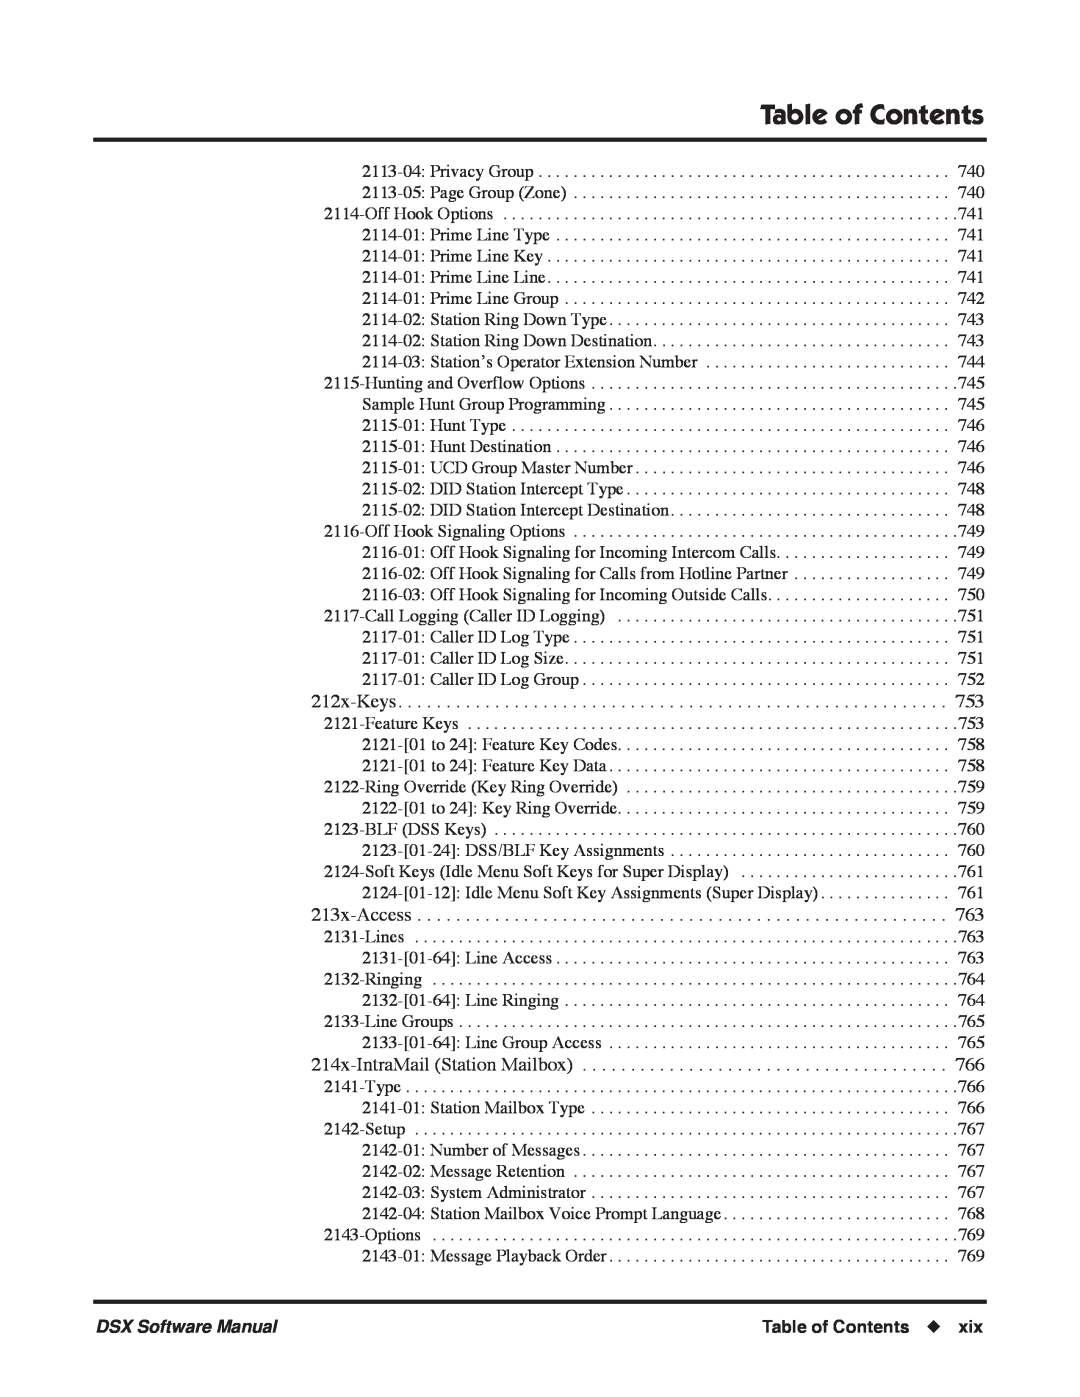 NEC P, N 1093100 software manual Table of Contents, 212x-Keys 